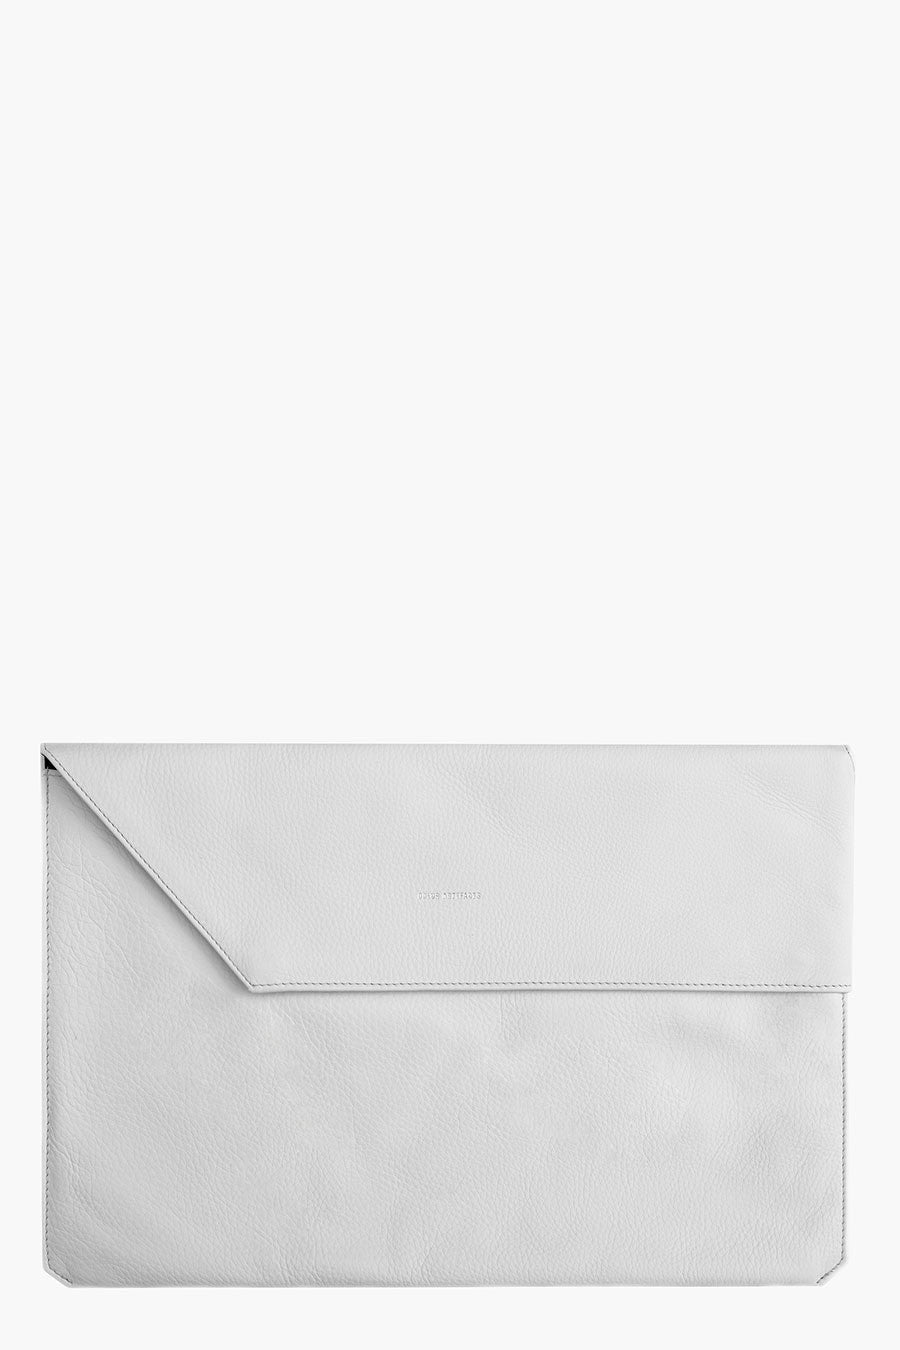 Odeur Artefacts Fold Laptop Case: White Leather